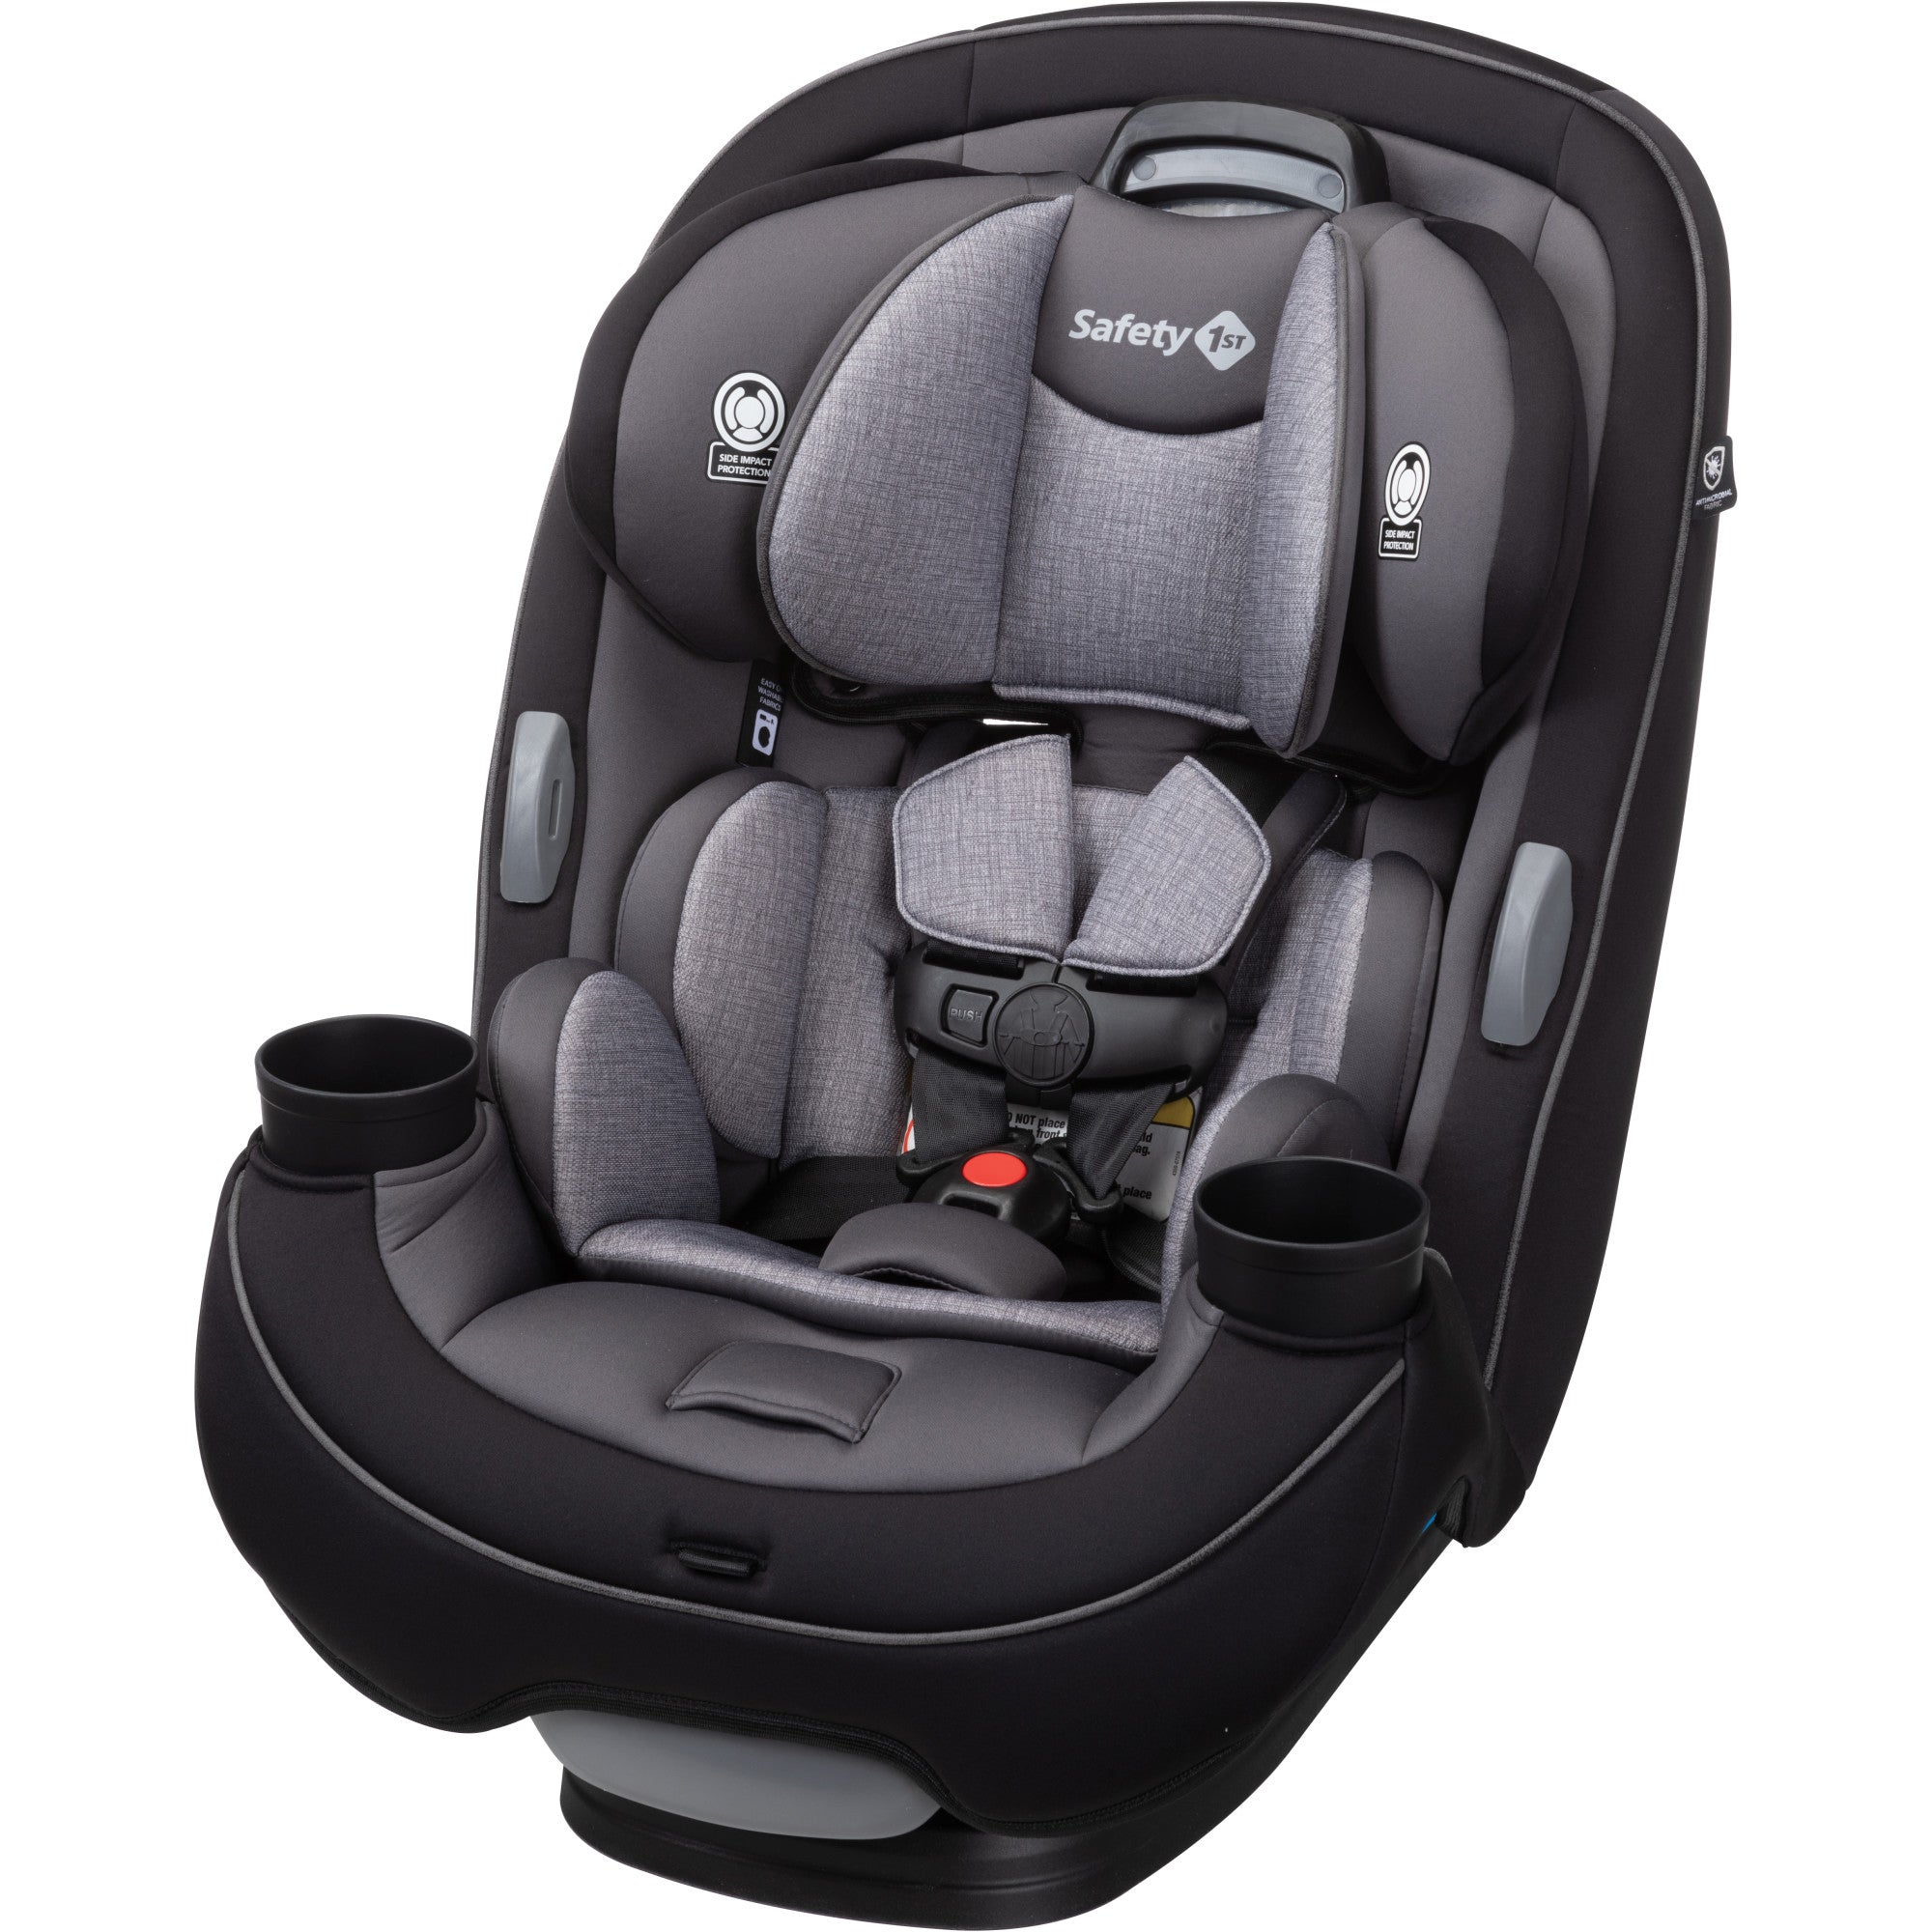 Safety 1st car seat in black and grey